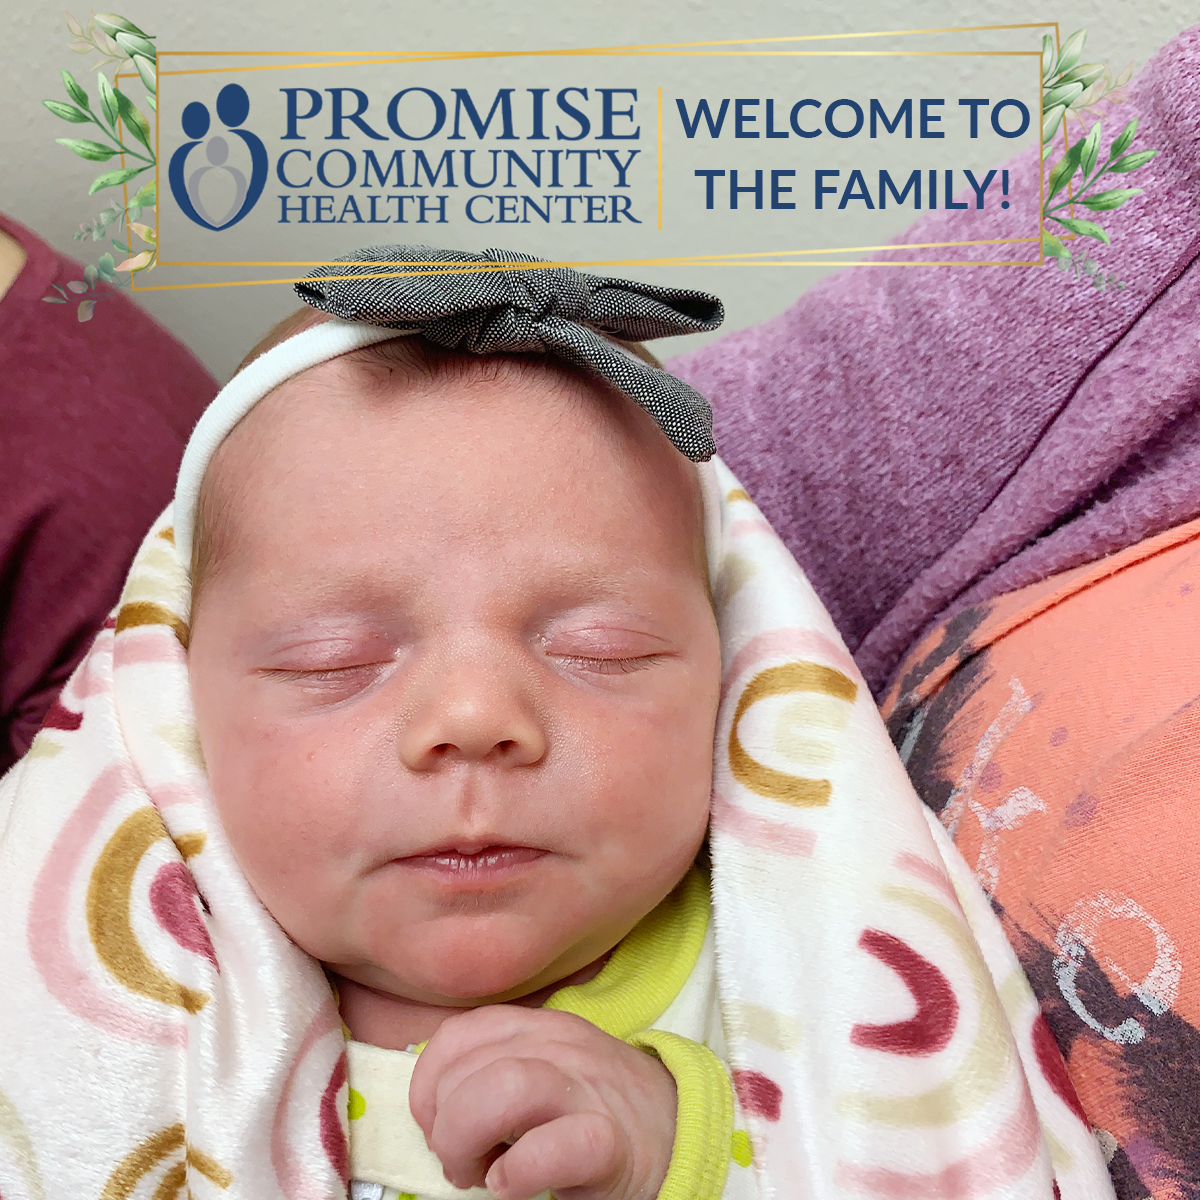 Jonathan and Courtney Ellis Home Birth in Sioux Center, Iowa | Promise Community Health Center in Sioux Center, Iowa | Home births in northwest Iowa, Home births in southeast South Dakota, Home births in southwest Minnesota | Home births in Sioux Falls South Dakota, Home births in Beresford South Dakota, Home births in Sioux City IA, Home births in LeMars IA, Home births in Worthington MN, Home births in Iowa, Home births in South Dakota, Home births in Minnesota